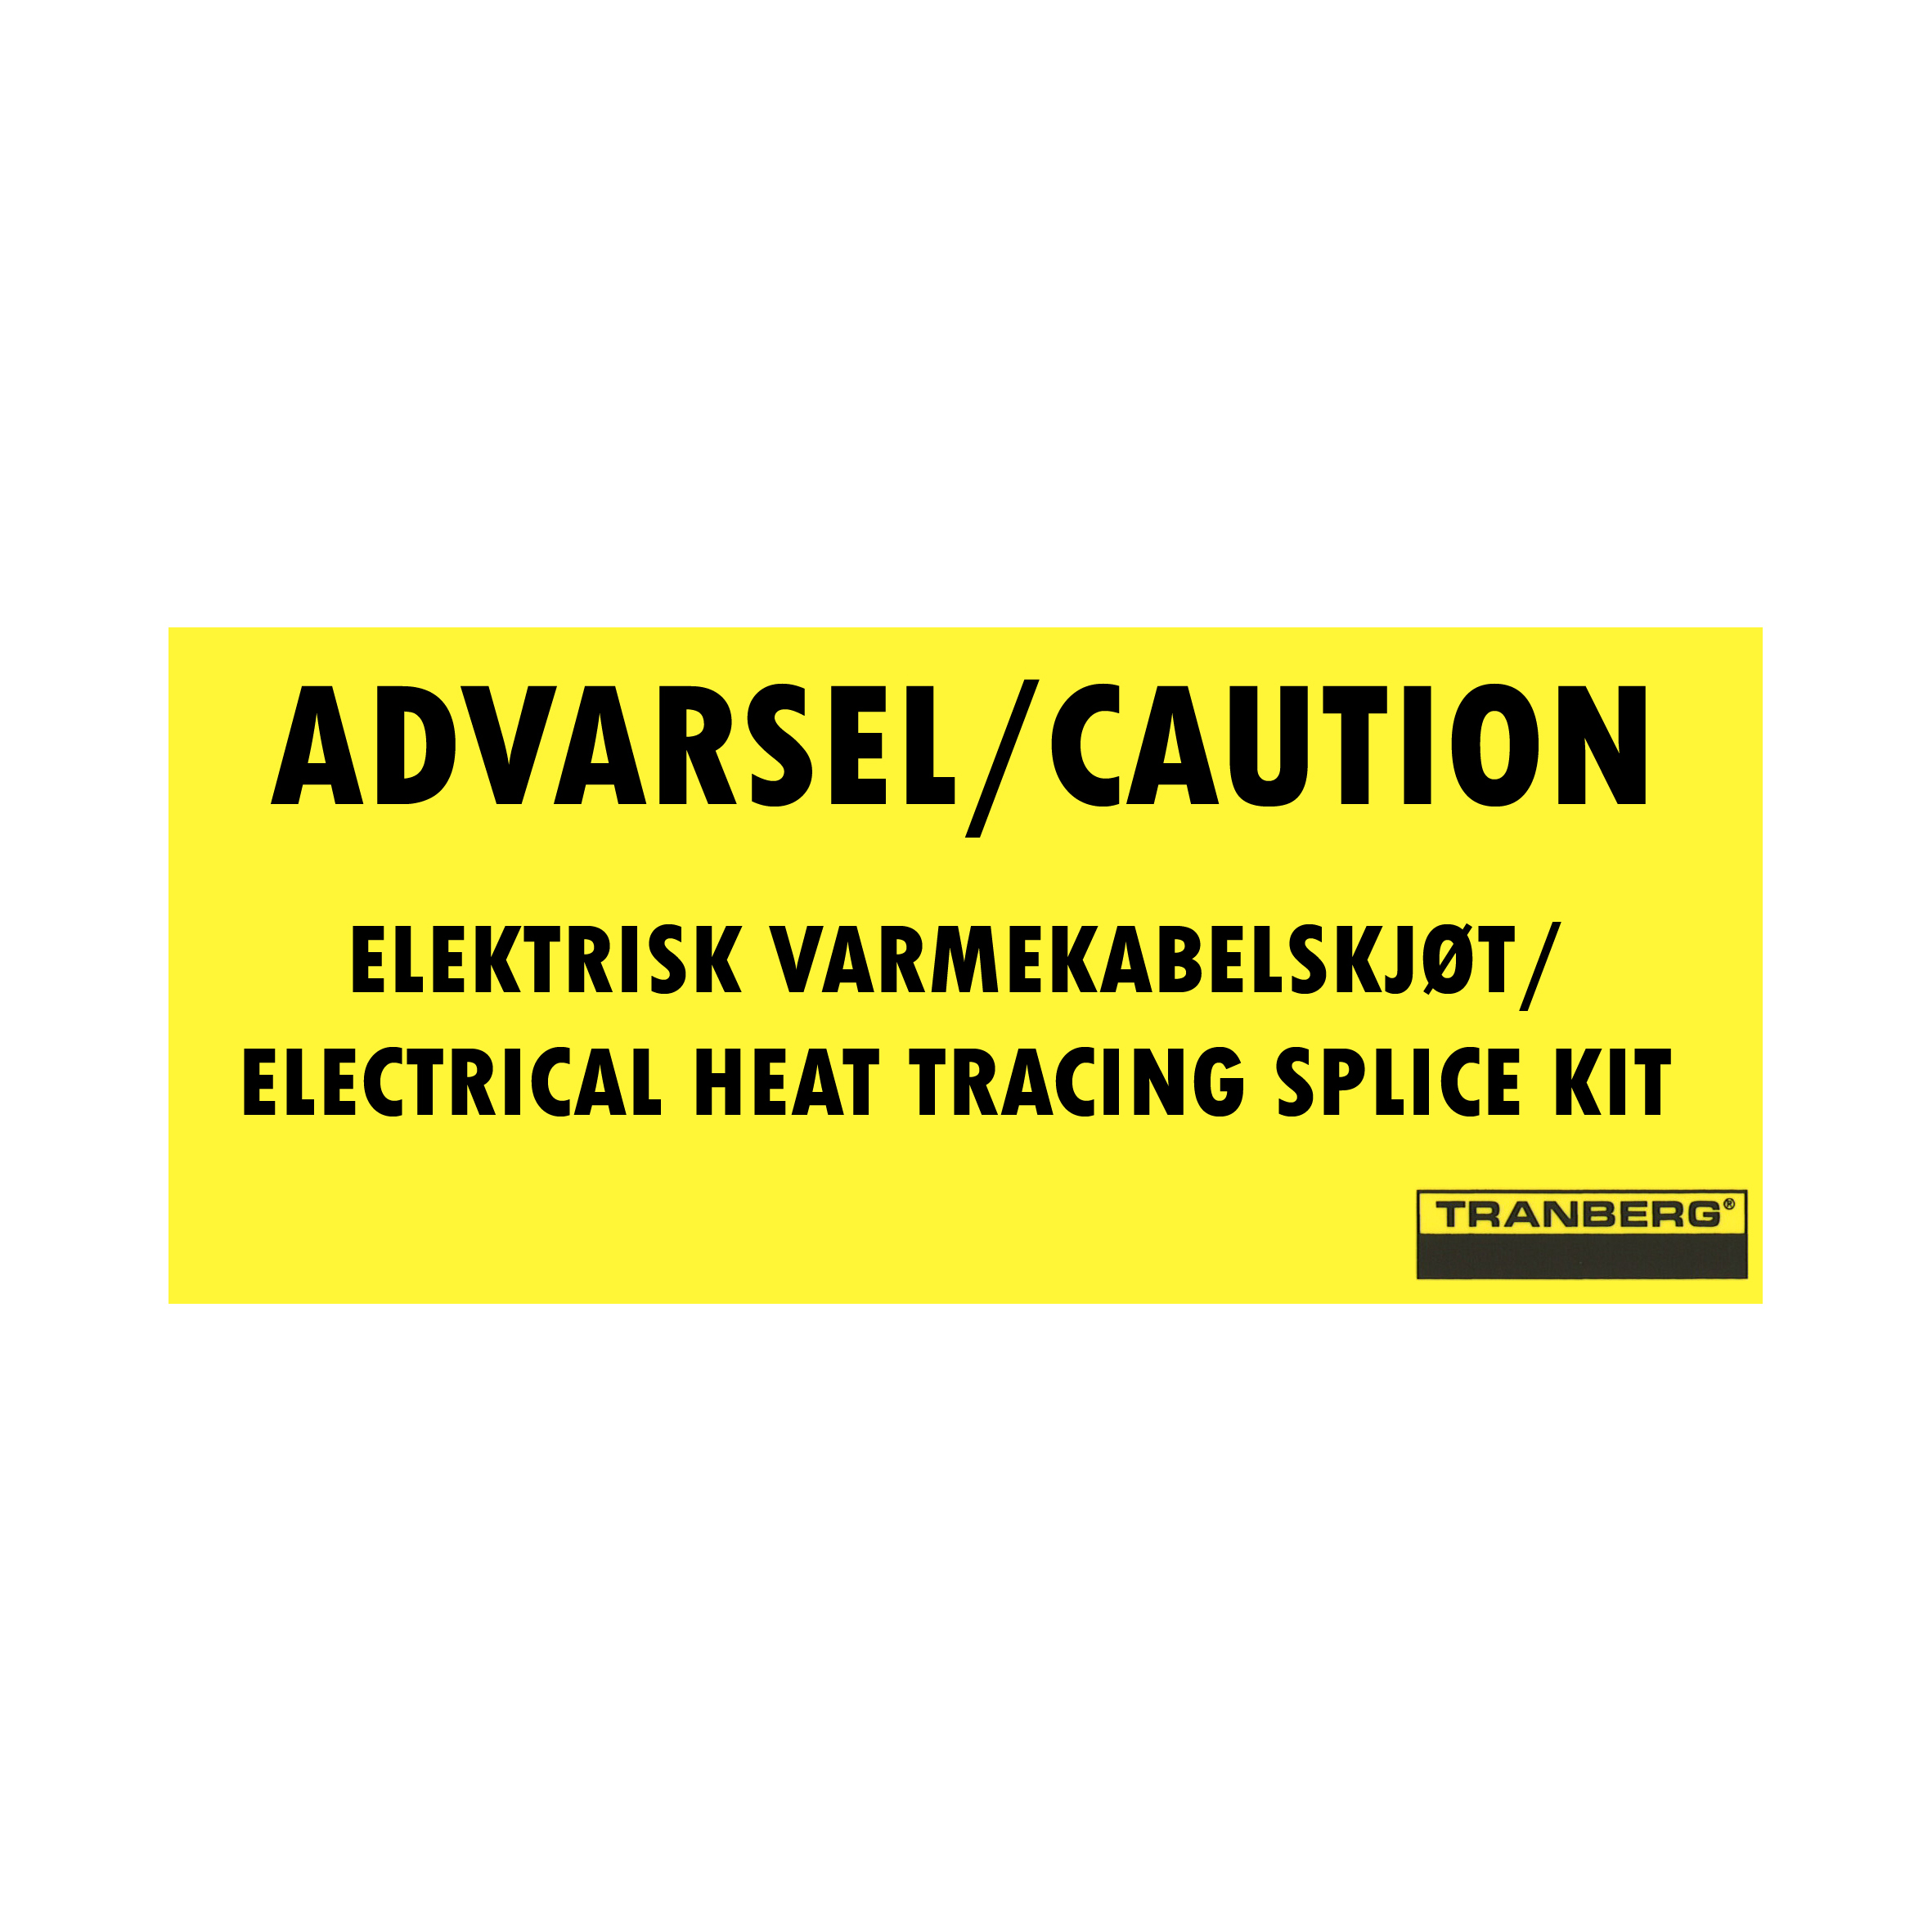 Caution Label - Electrical Heat Tracing Splice kit - Norwegian/English text photo